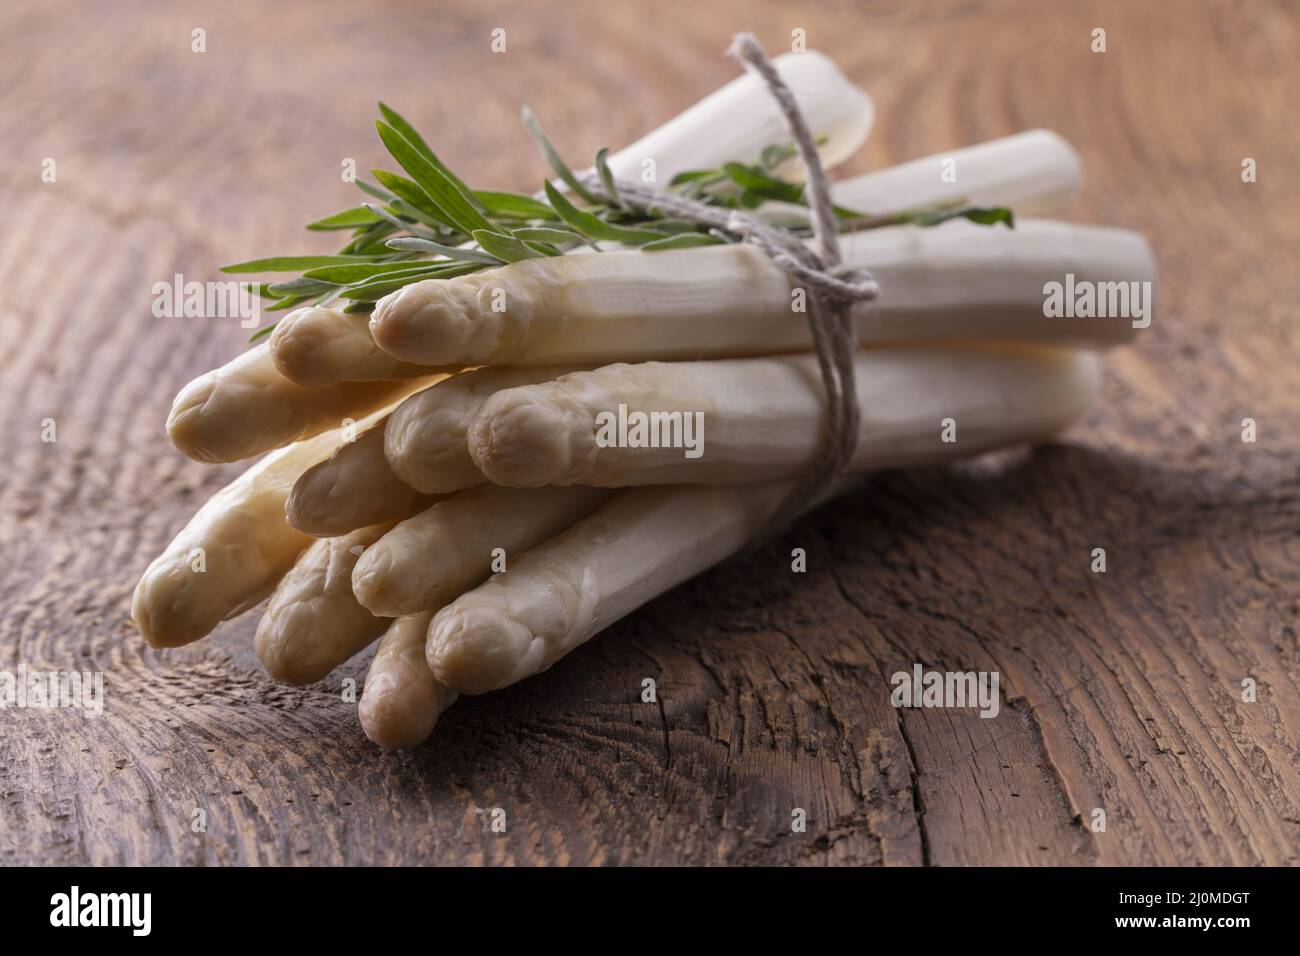 Bunch of white asparagus on wood Stock Photo